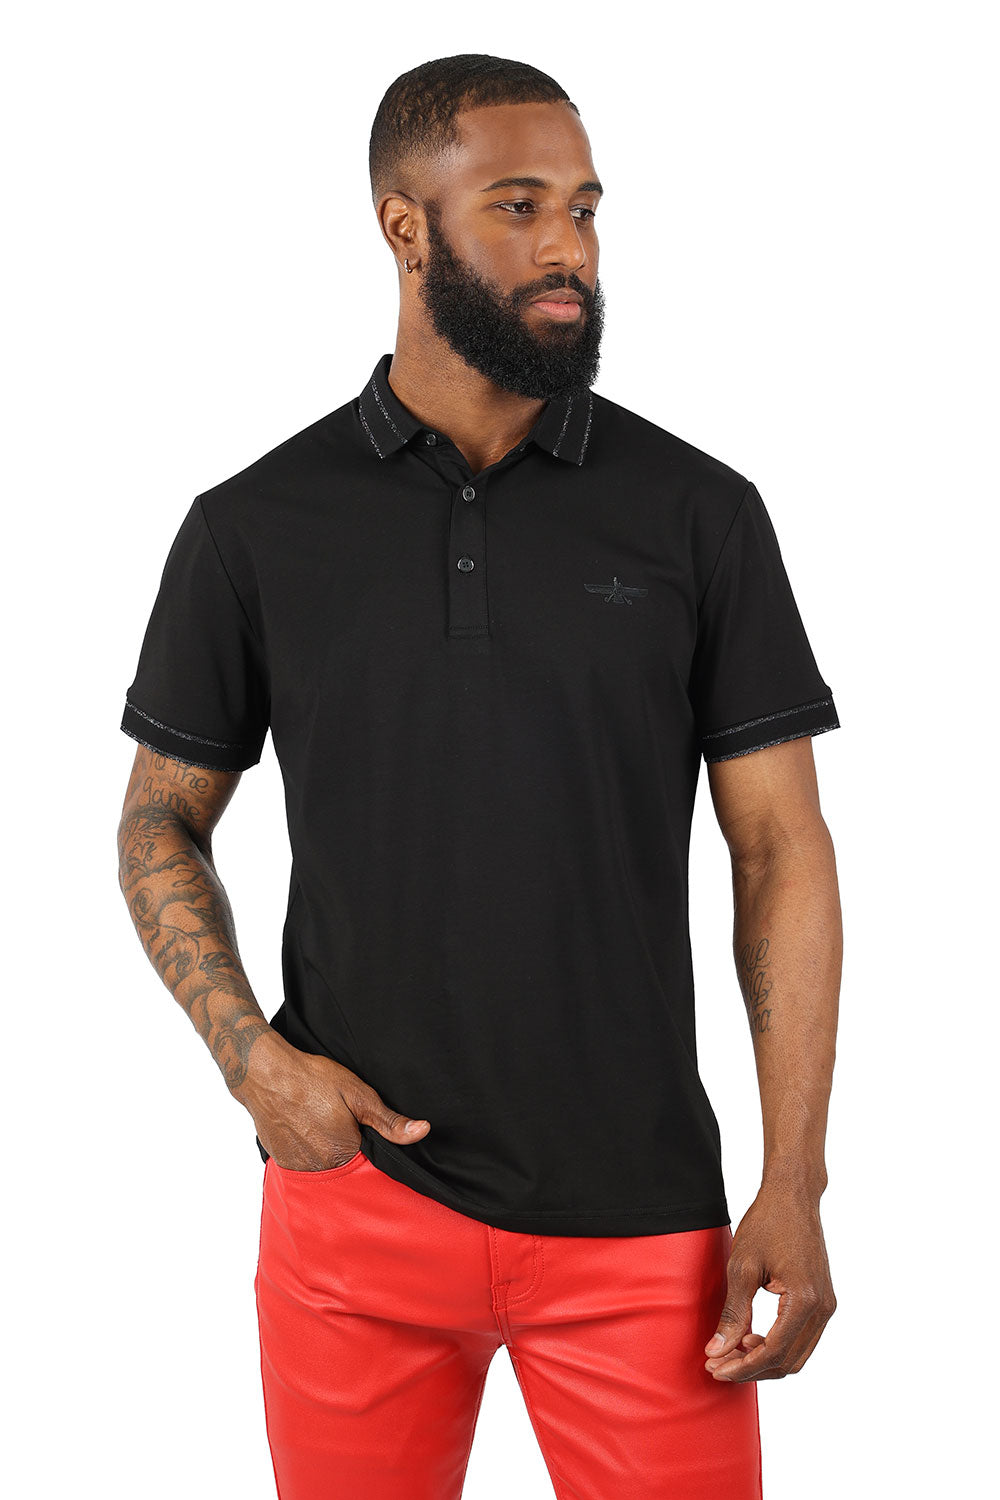 Barabas Men's Solid Color with Logo Polo Shirts 3PP832 Black